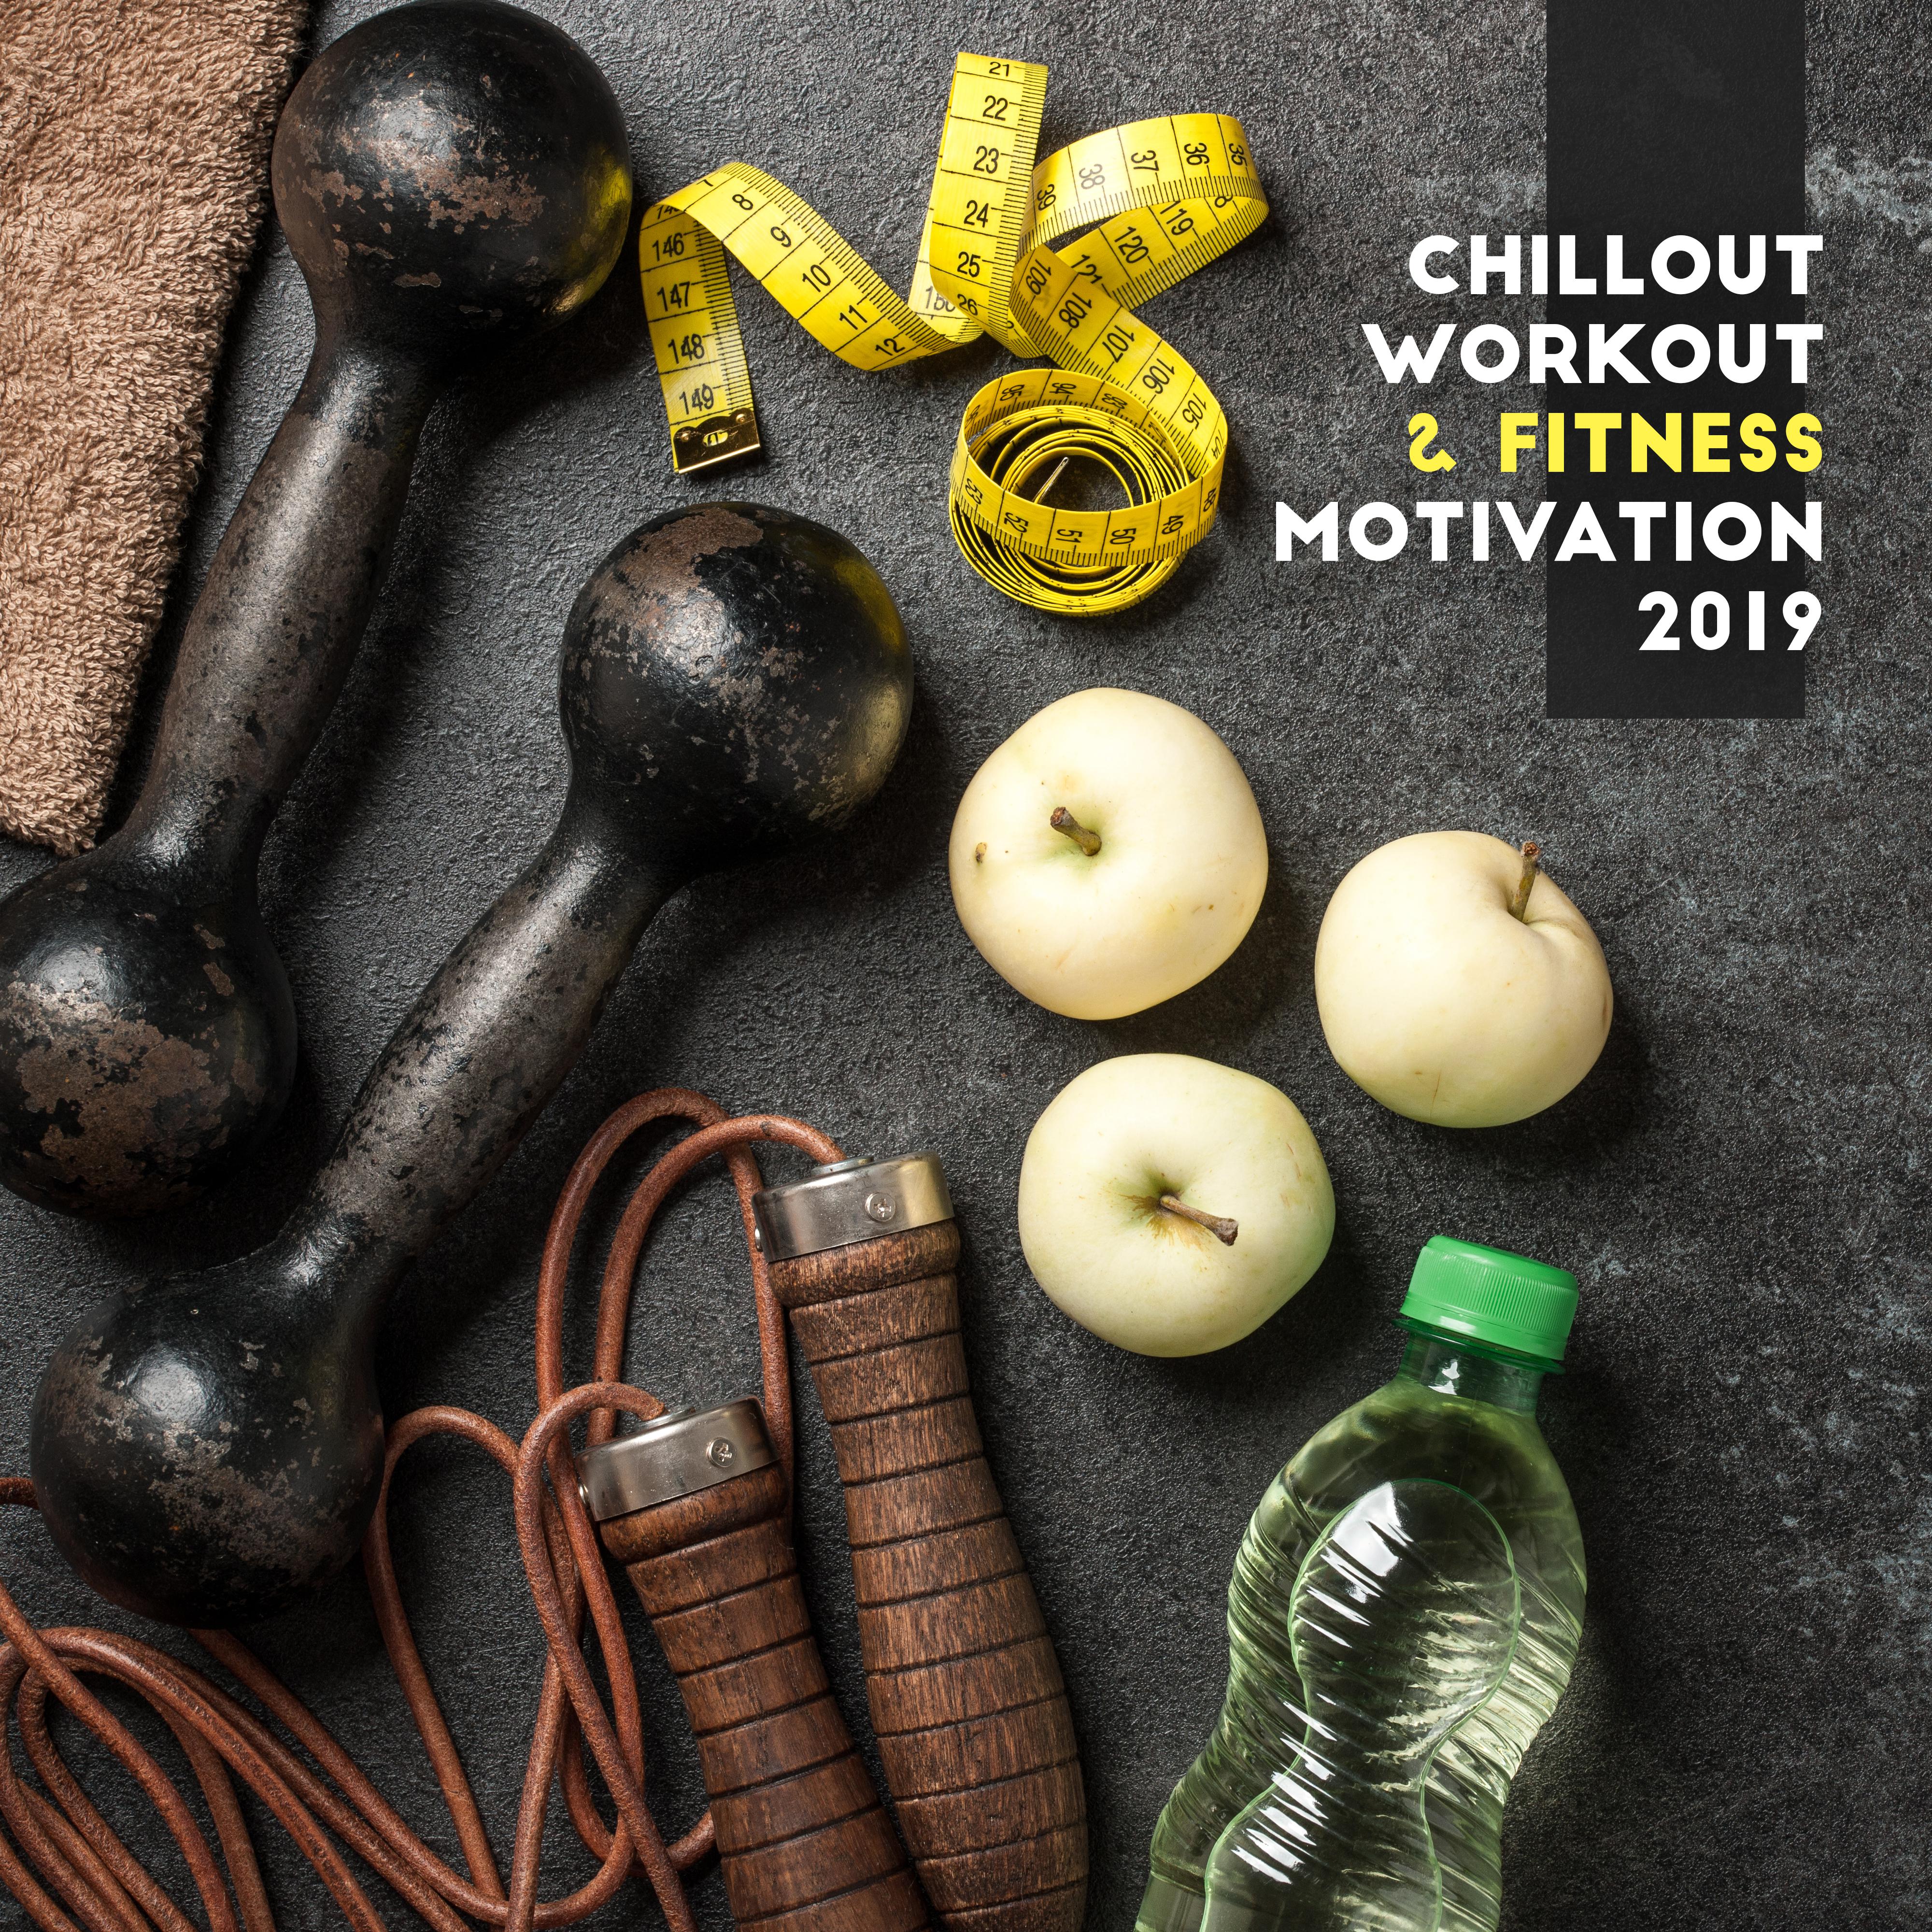 Chillout Workout & Fitness Motivation 2019